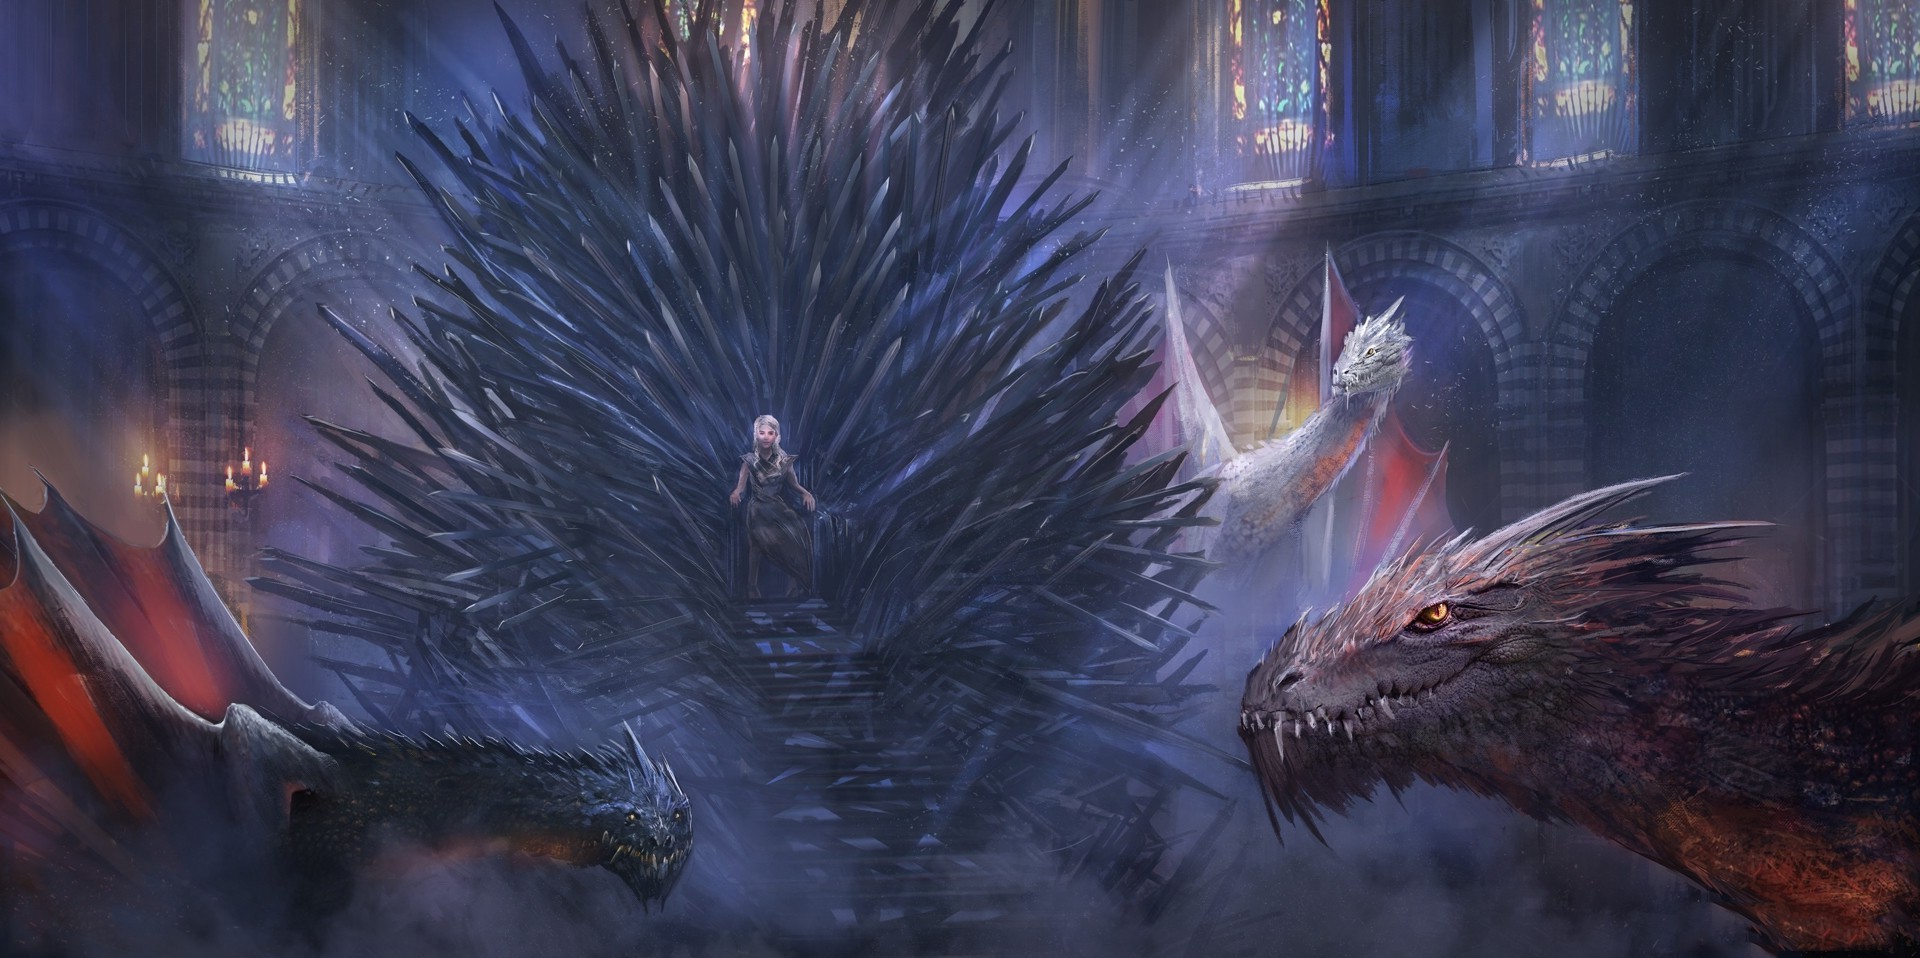 Mother Of Dragons Game Of Thrones 8 Artwork Wallpapers